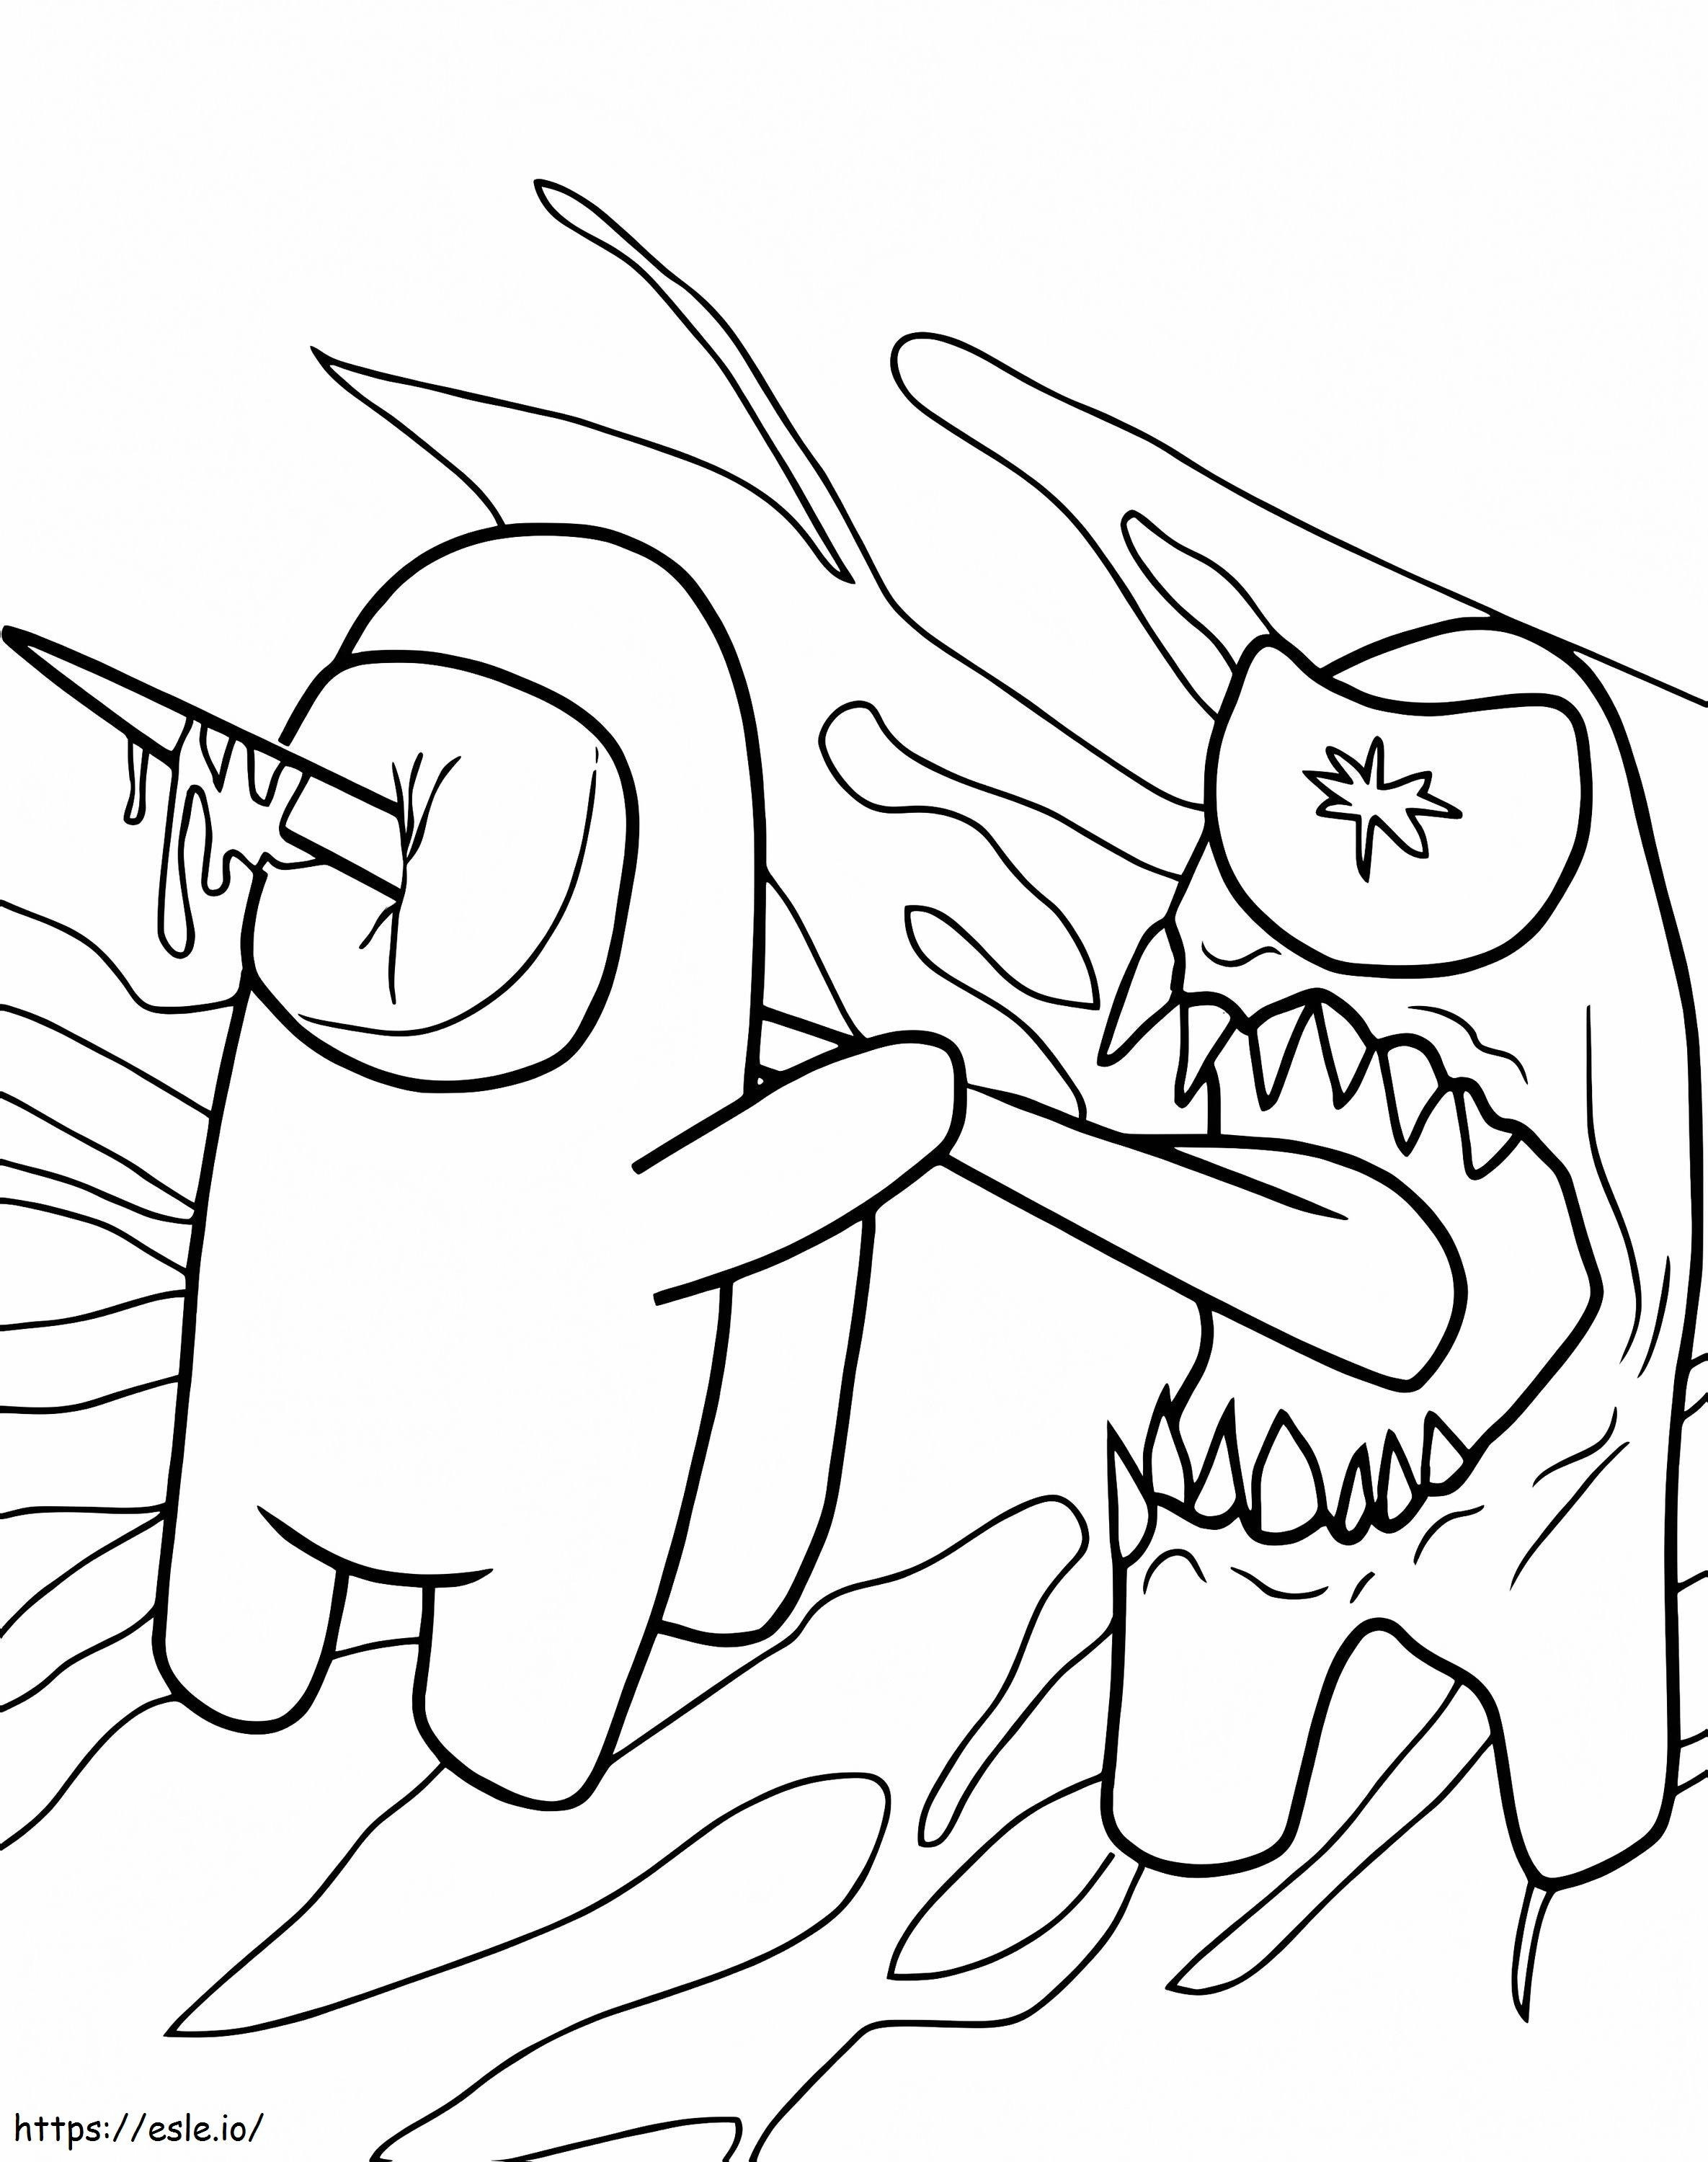 Killing Crewmate coloring page